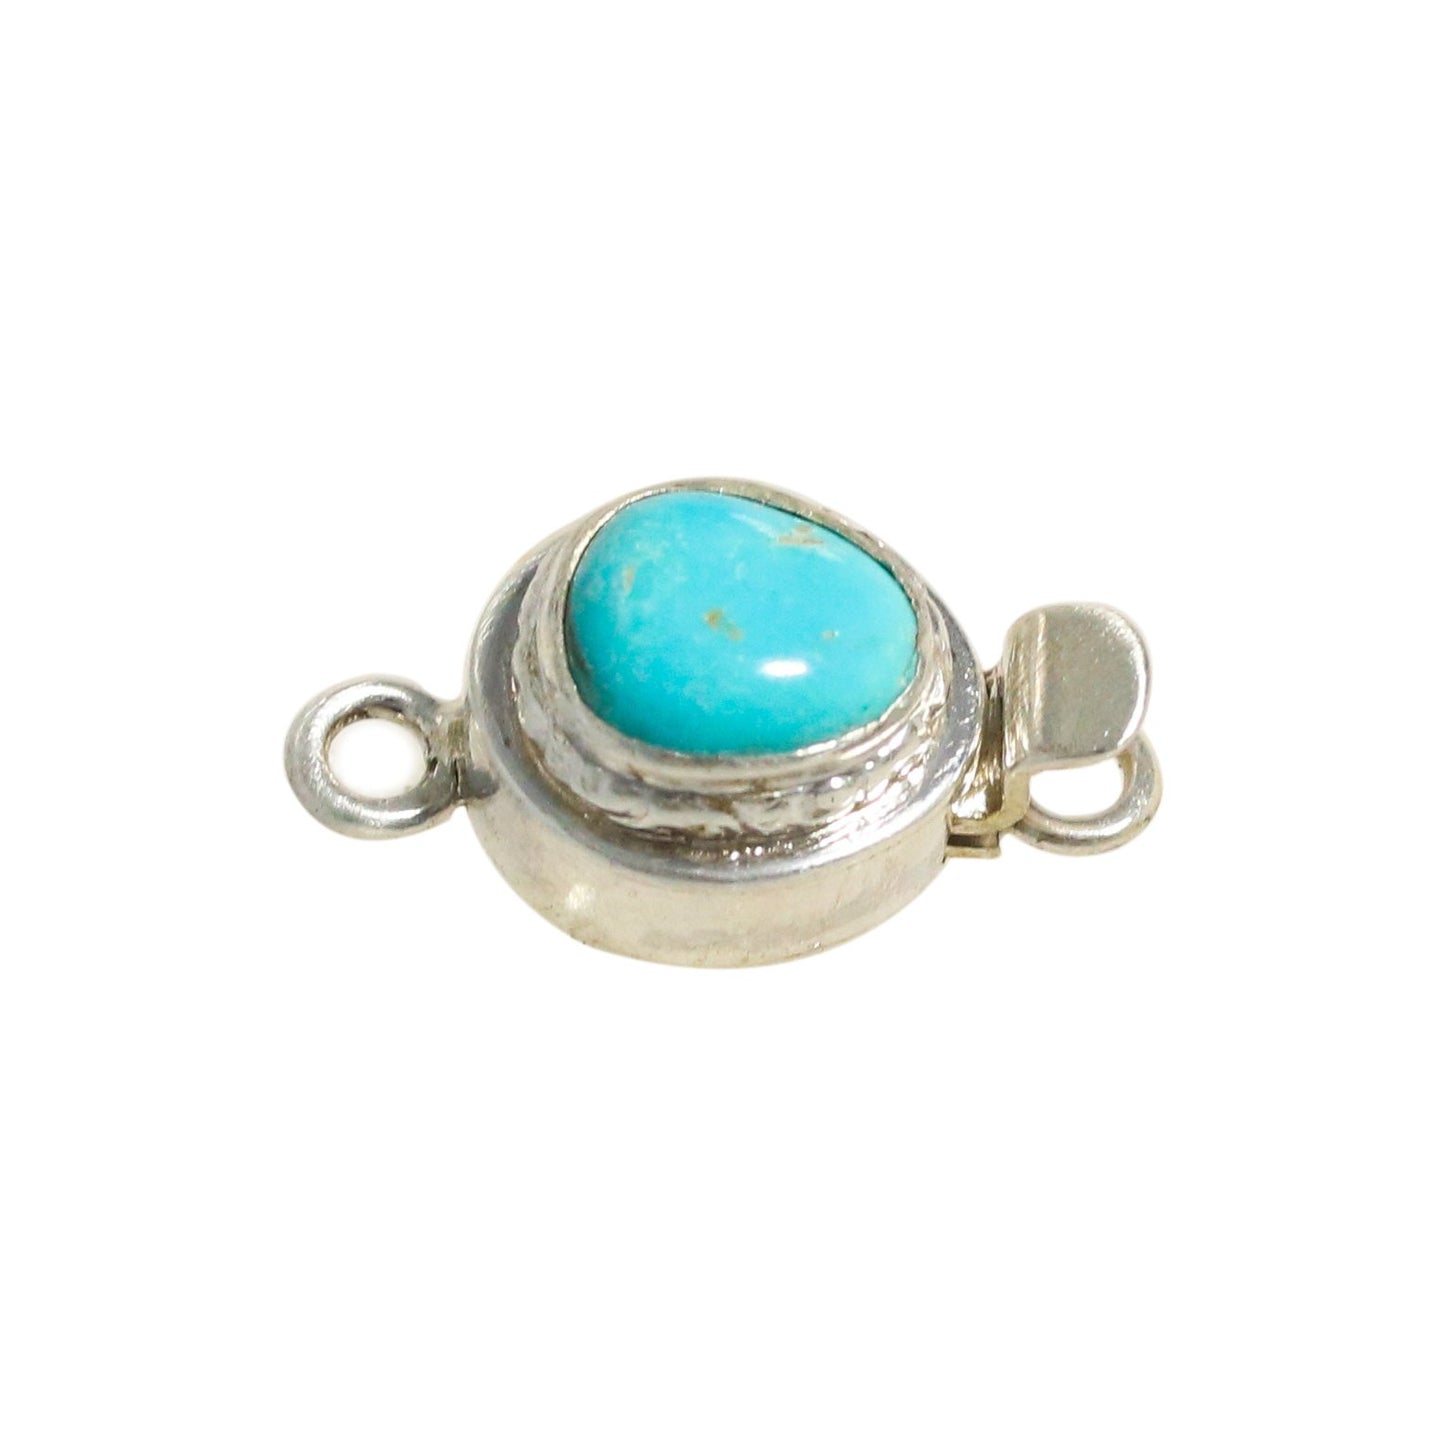 Castle Dome Turquoise Sterling Clasp Free Form Aqua, -NewWorldGems